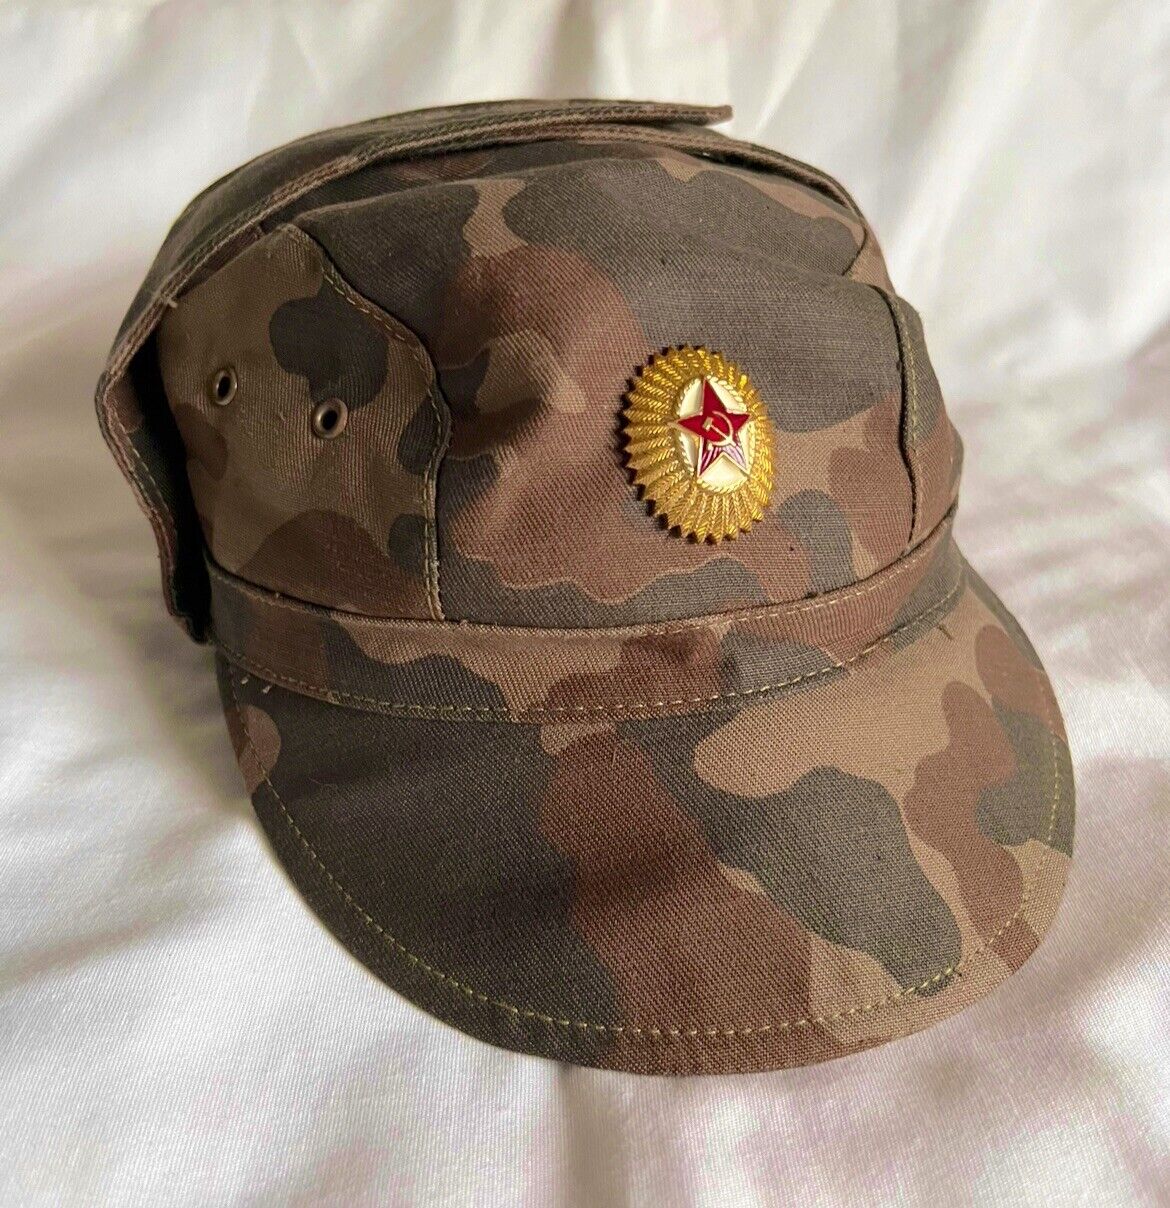 Russian Soviet Army Military Camo Camouflage Field Service Hat Cap Sz: 59